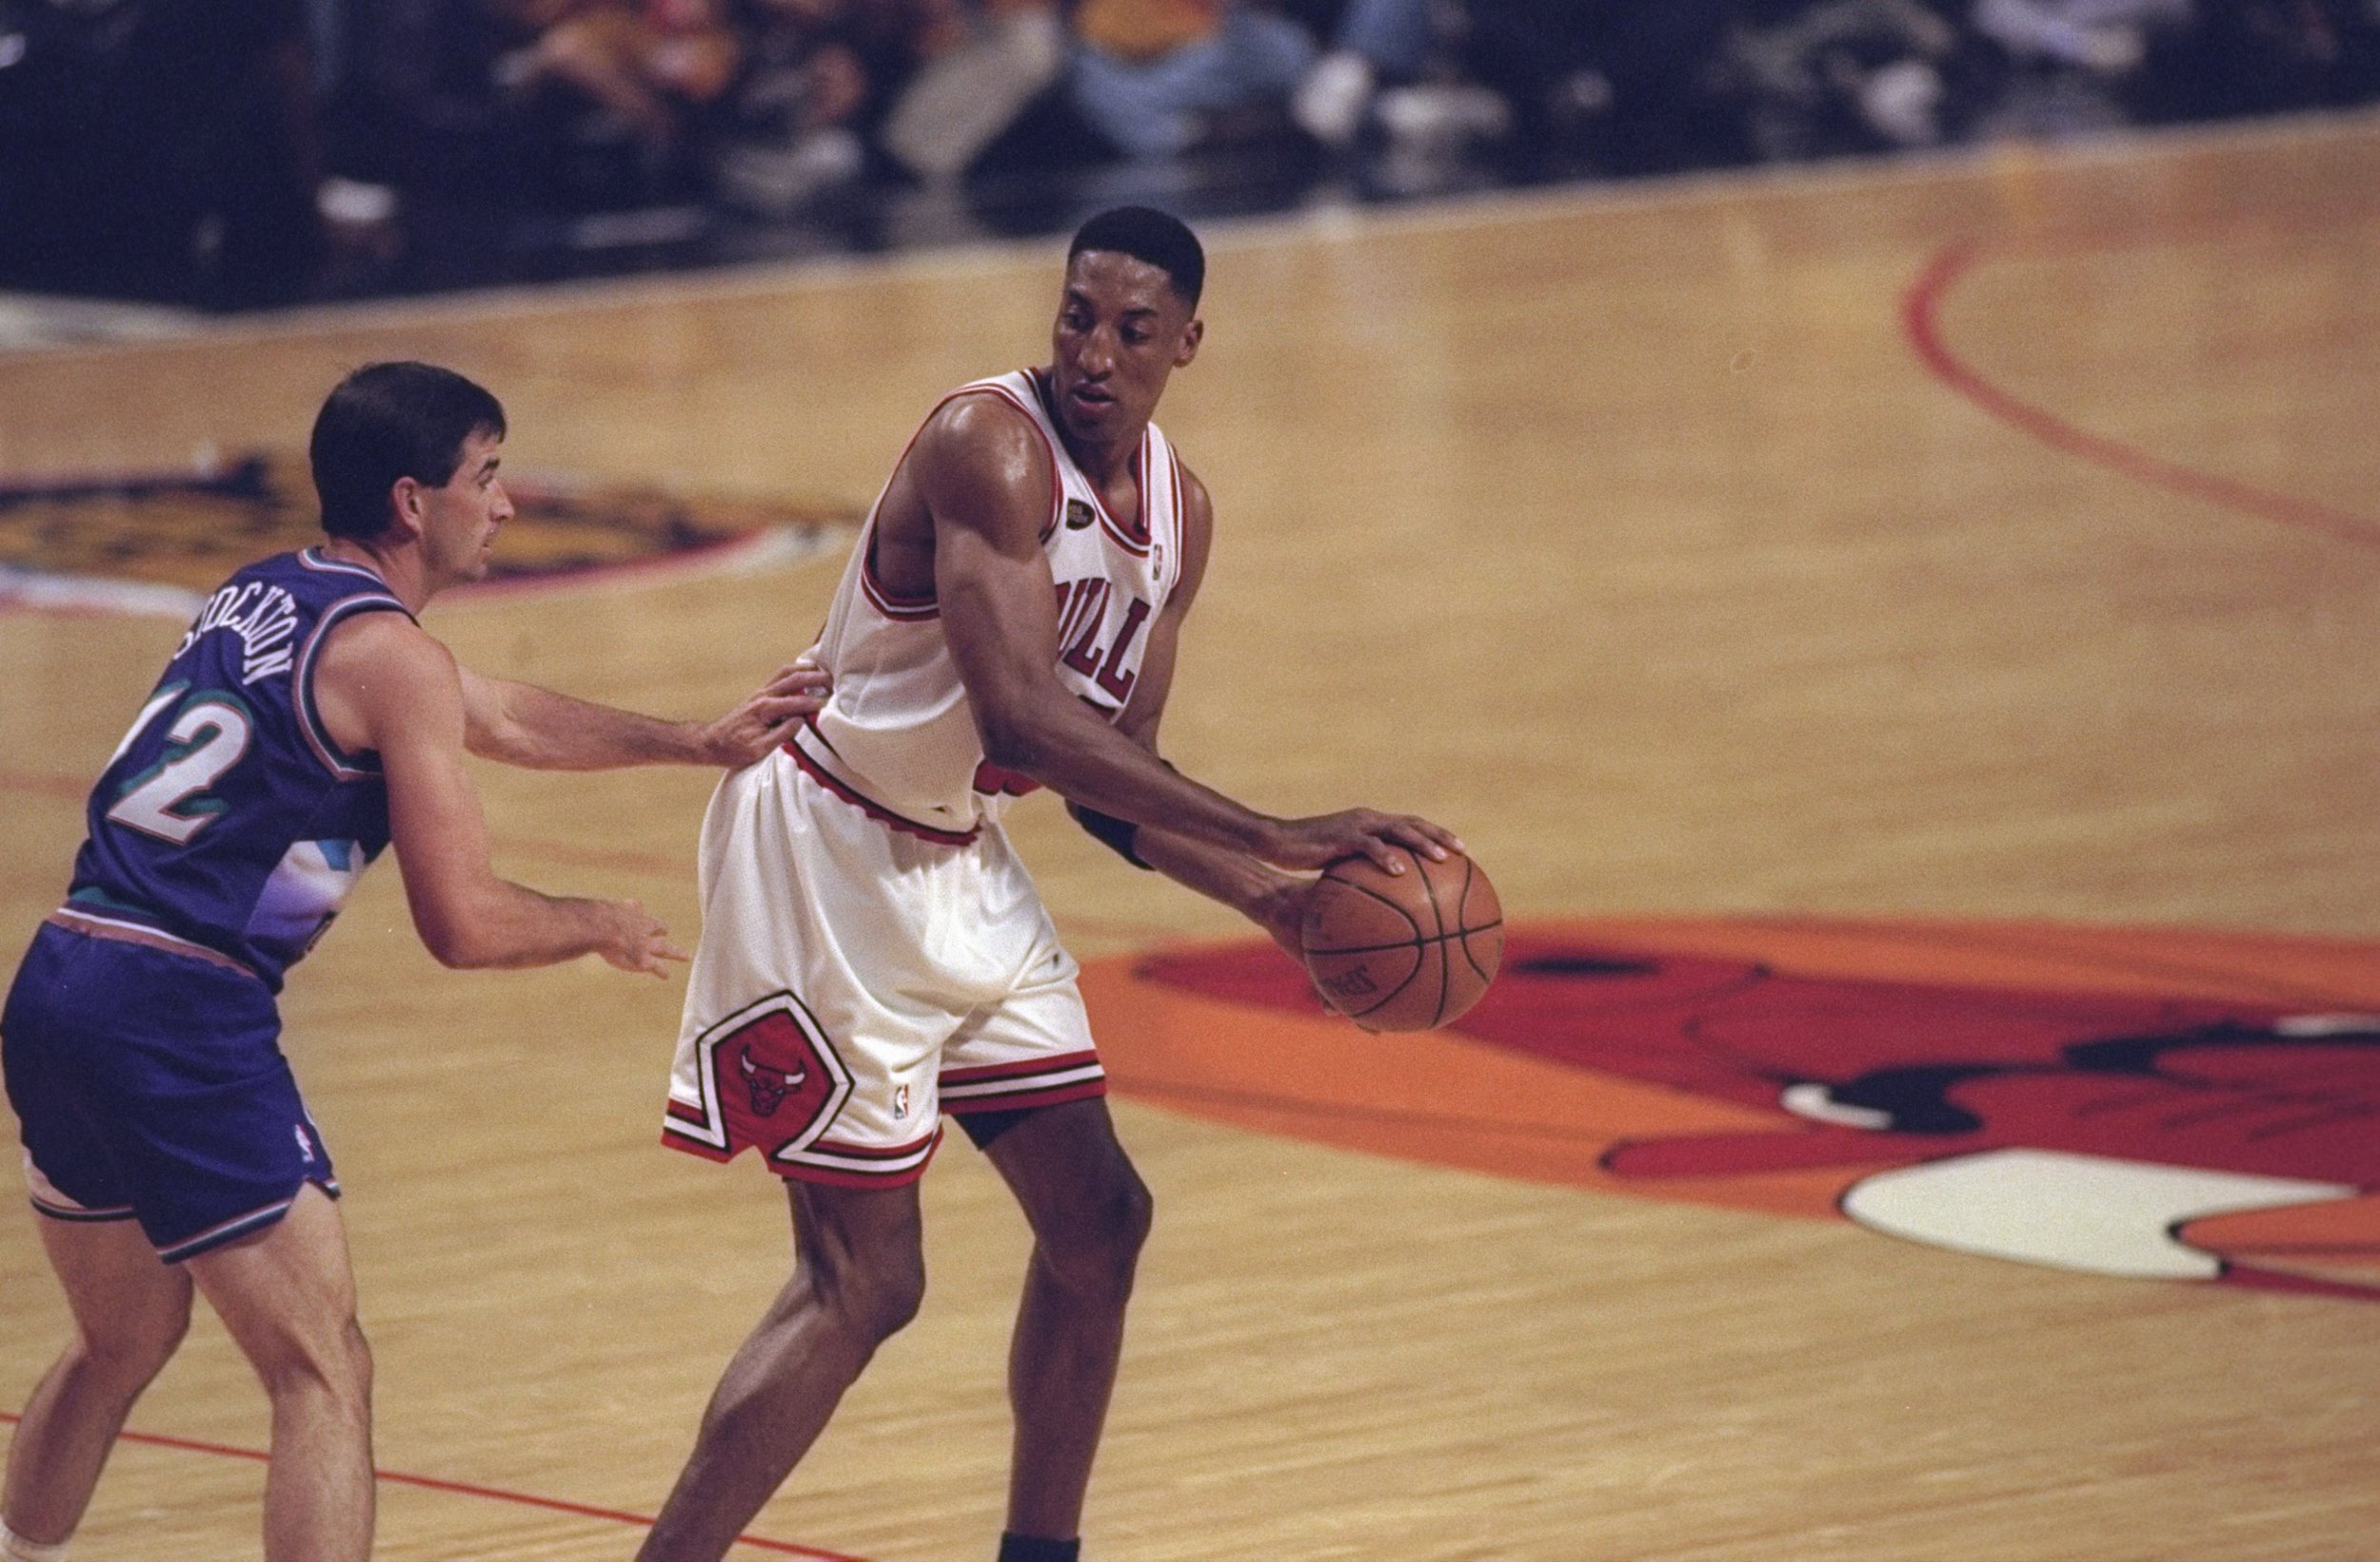 While Scottie Pippen returned to the Chicago Bulls at the end of his career, it wasn't the best decision.